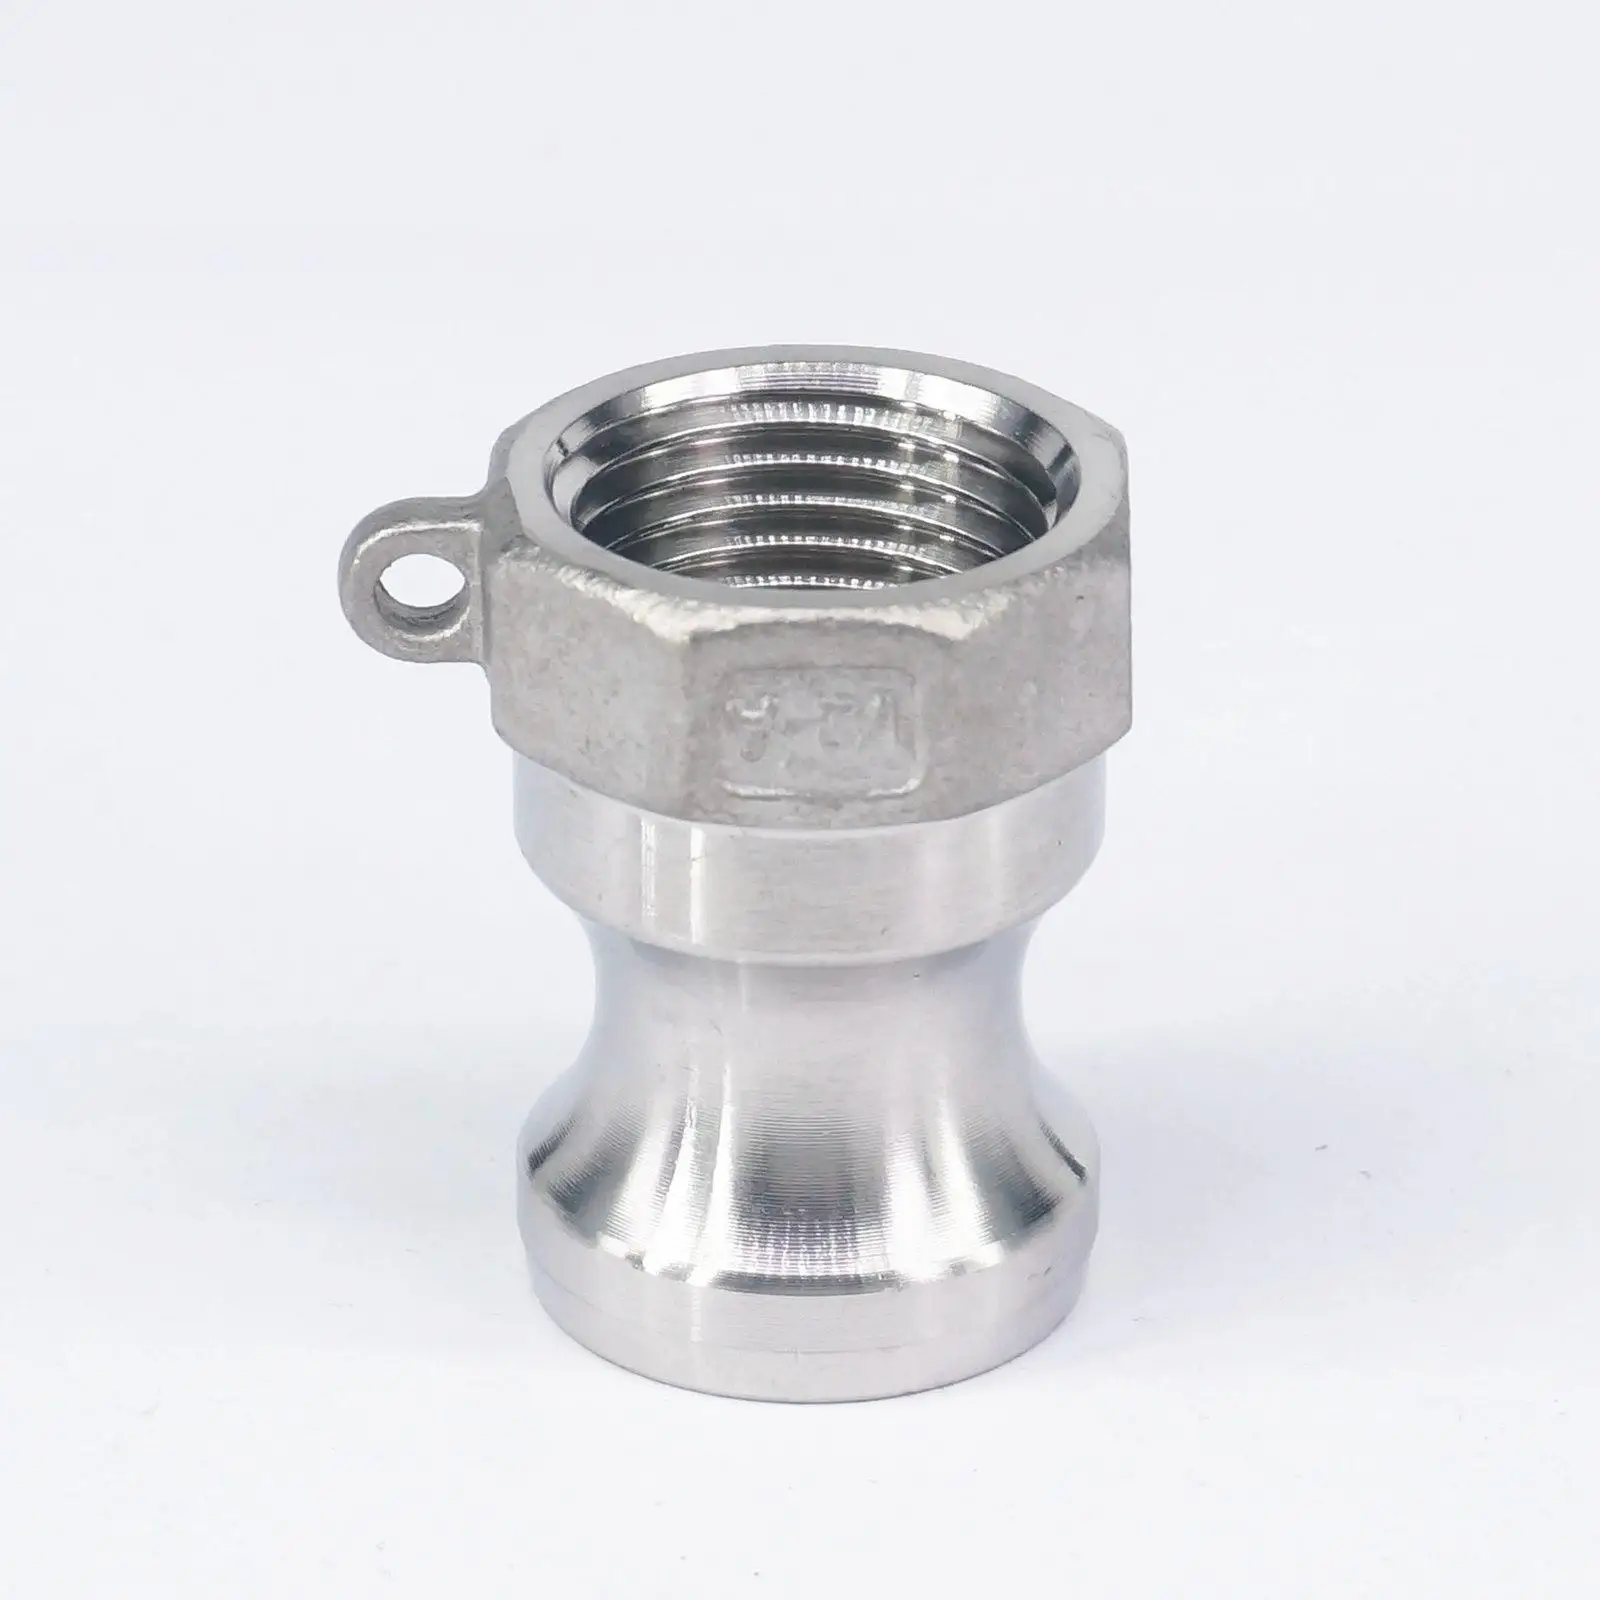 Details about   304 Stainless Steel BSP Female Blanking Cap Stop End Lock For1/4"-2" Water Pipe 